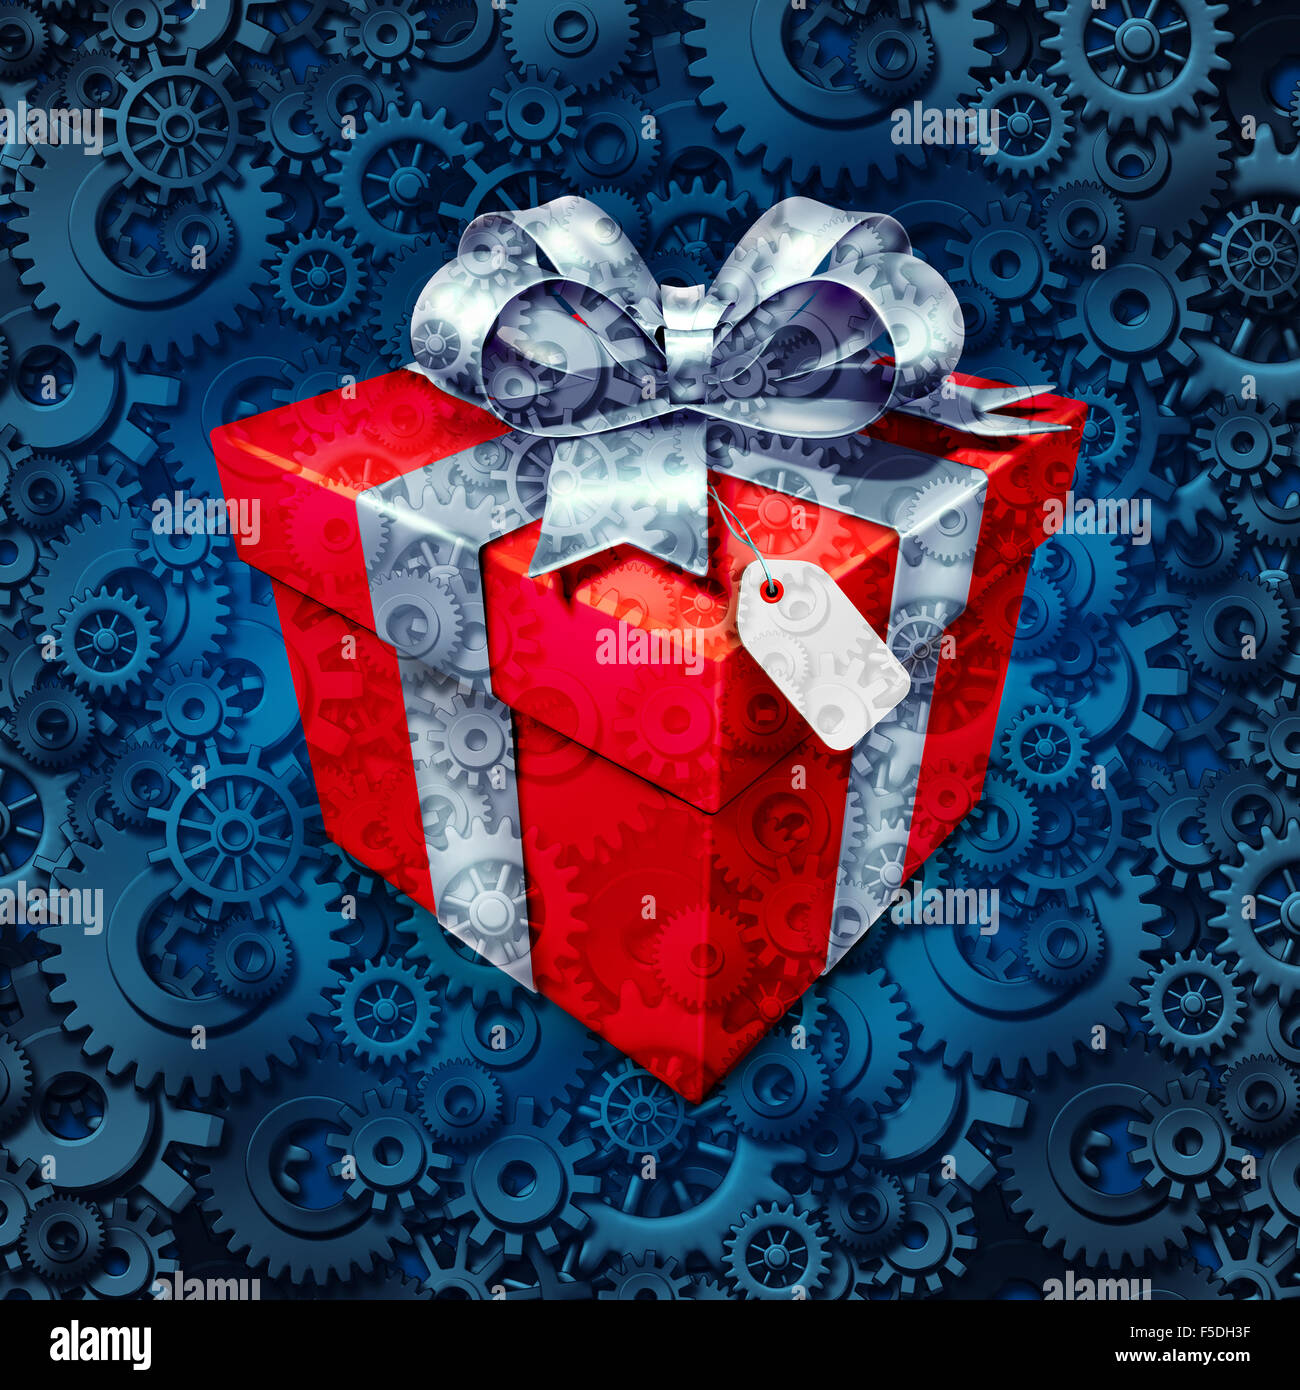 Gift business concept and corporate christmas or holiday presents symbol as a surpise box with a bow for a client or employee on a background of gears and cog wheels as a metaphor for the industry of giving. Stock Photo